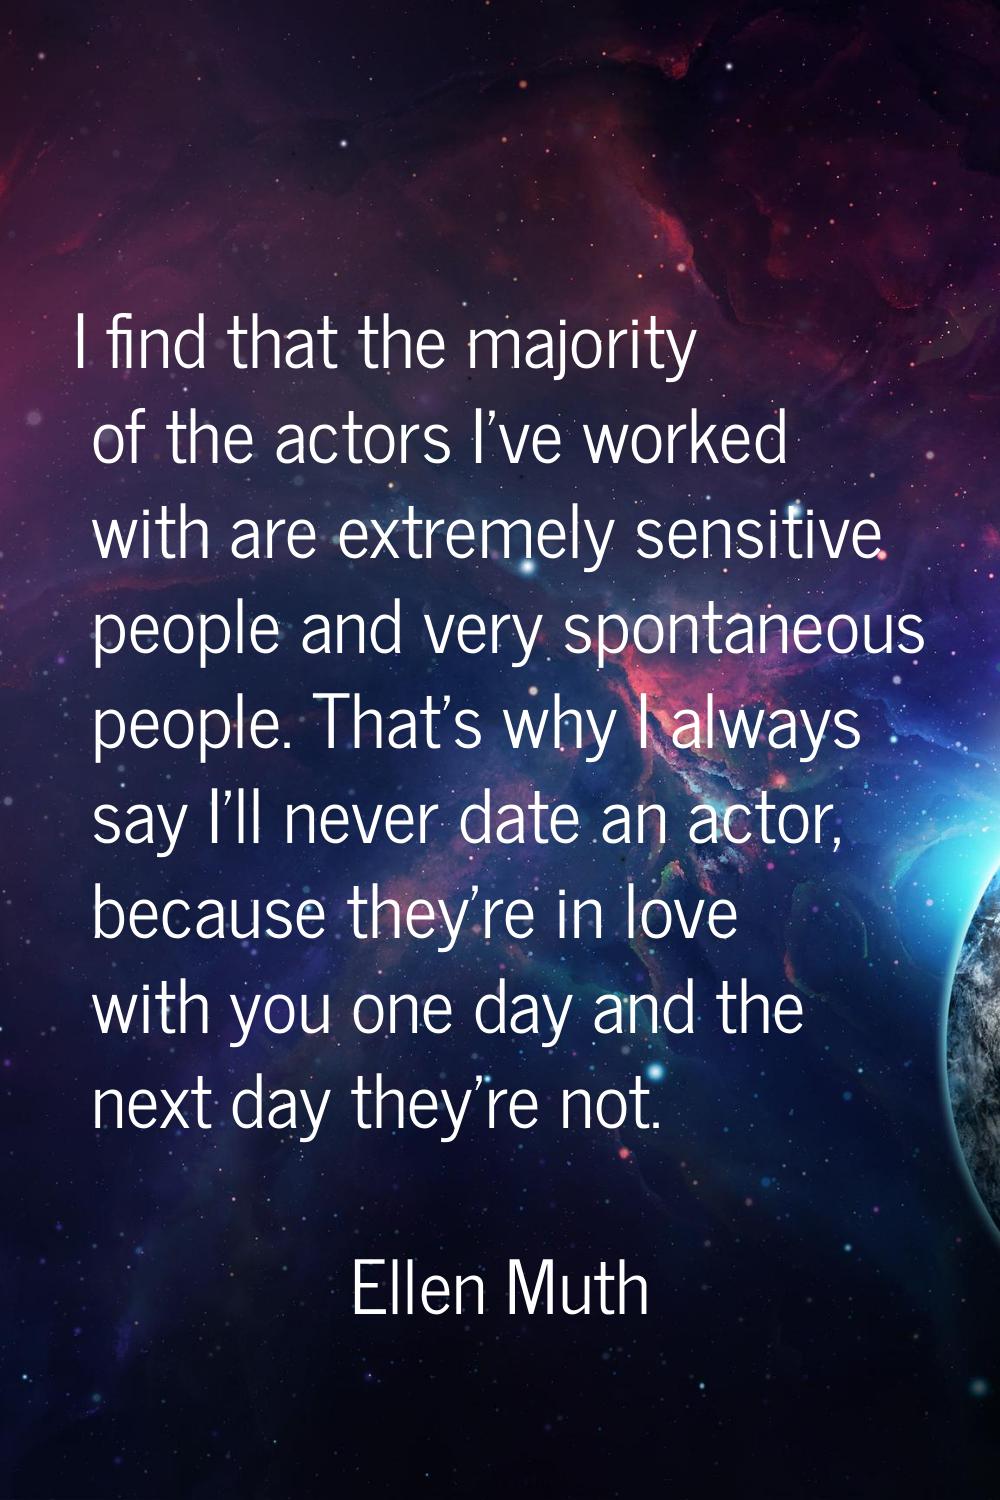 I find that the majority of the actors I've worked with are extremely sensitive people and very spo